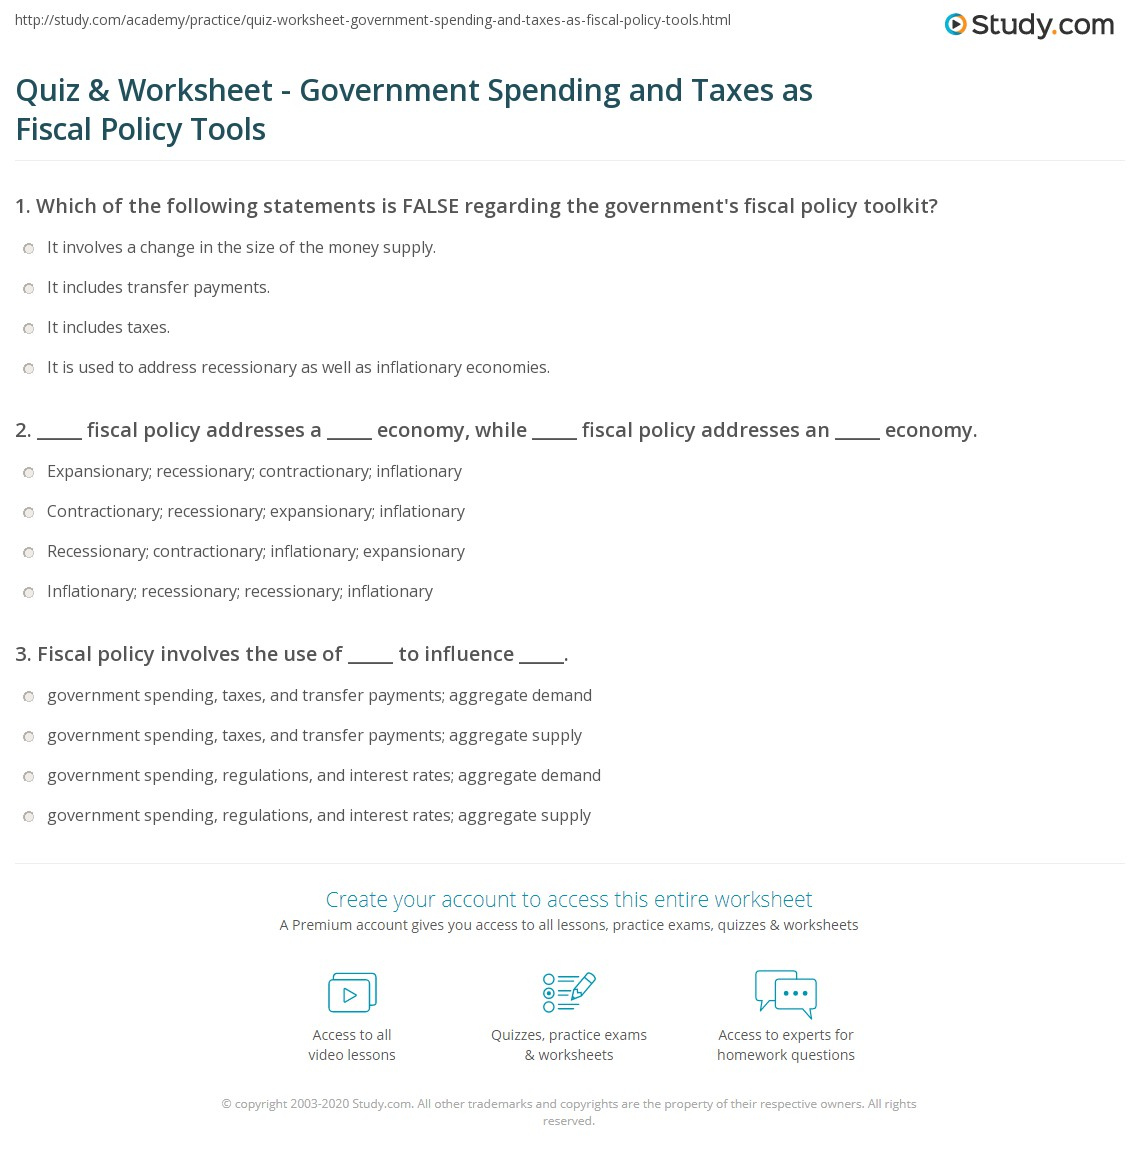 government-spending-icivics-answers-joint-center-citizenship-icivics-budgeting-worksheets